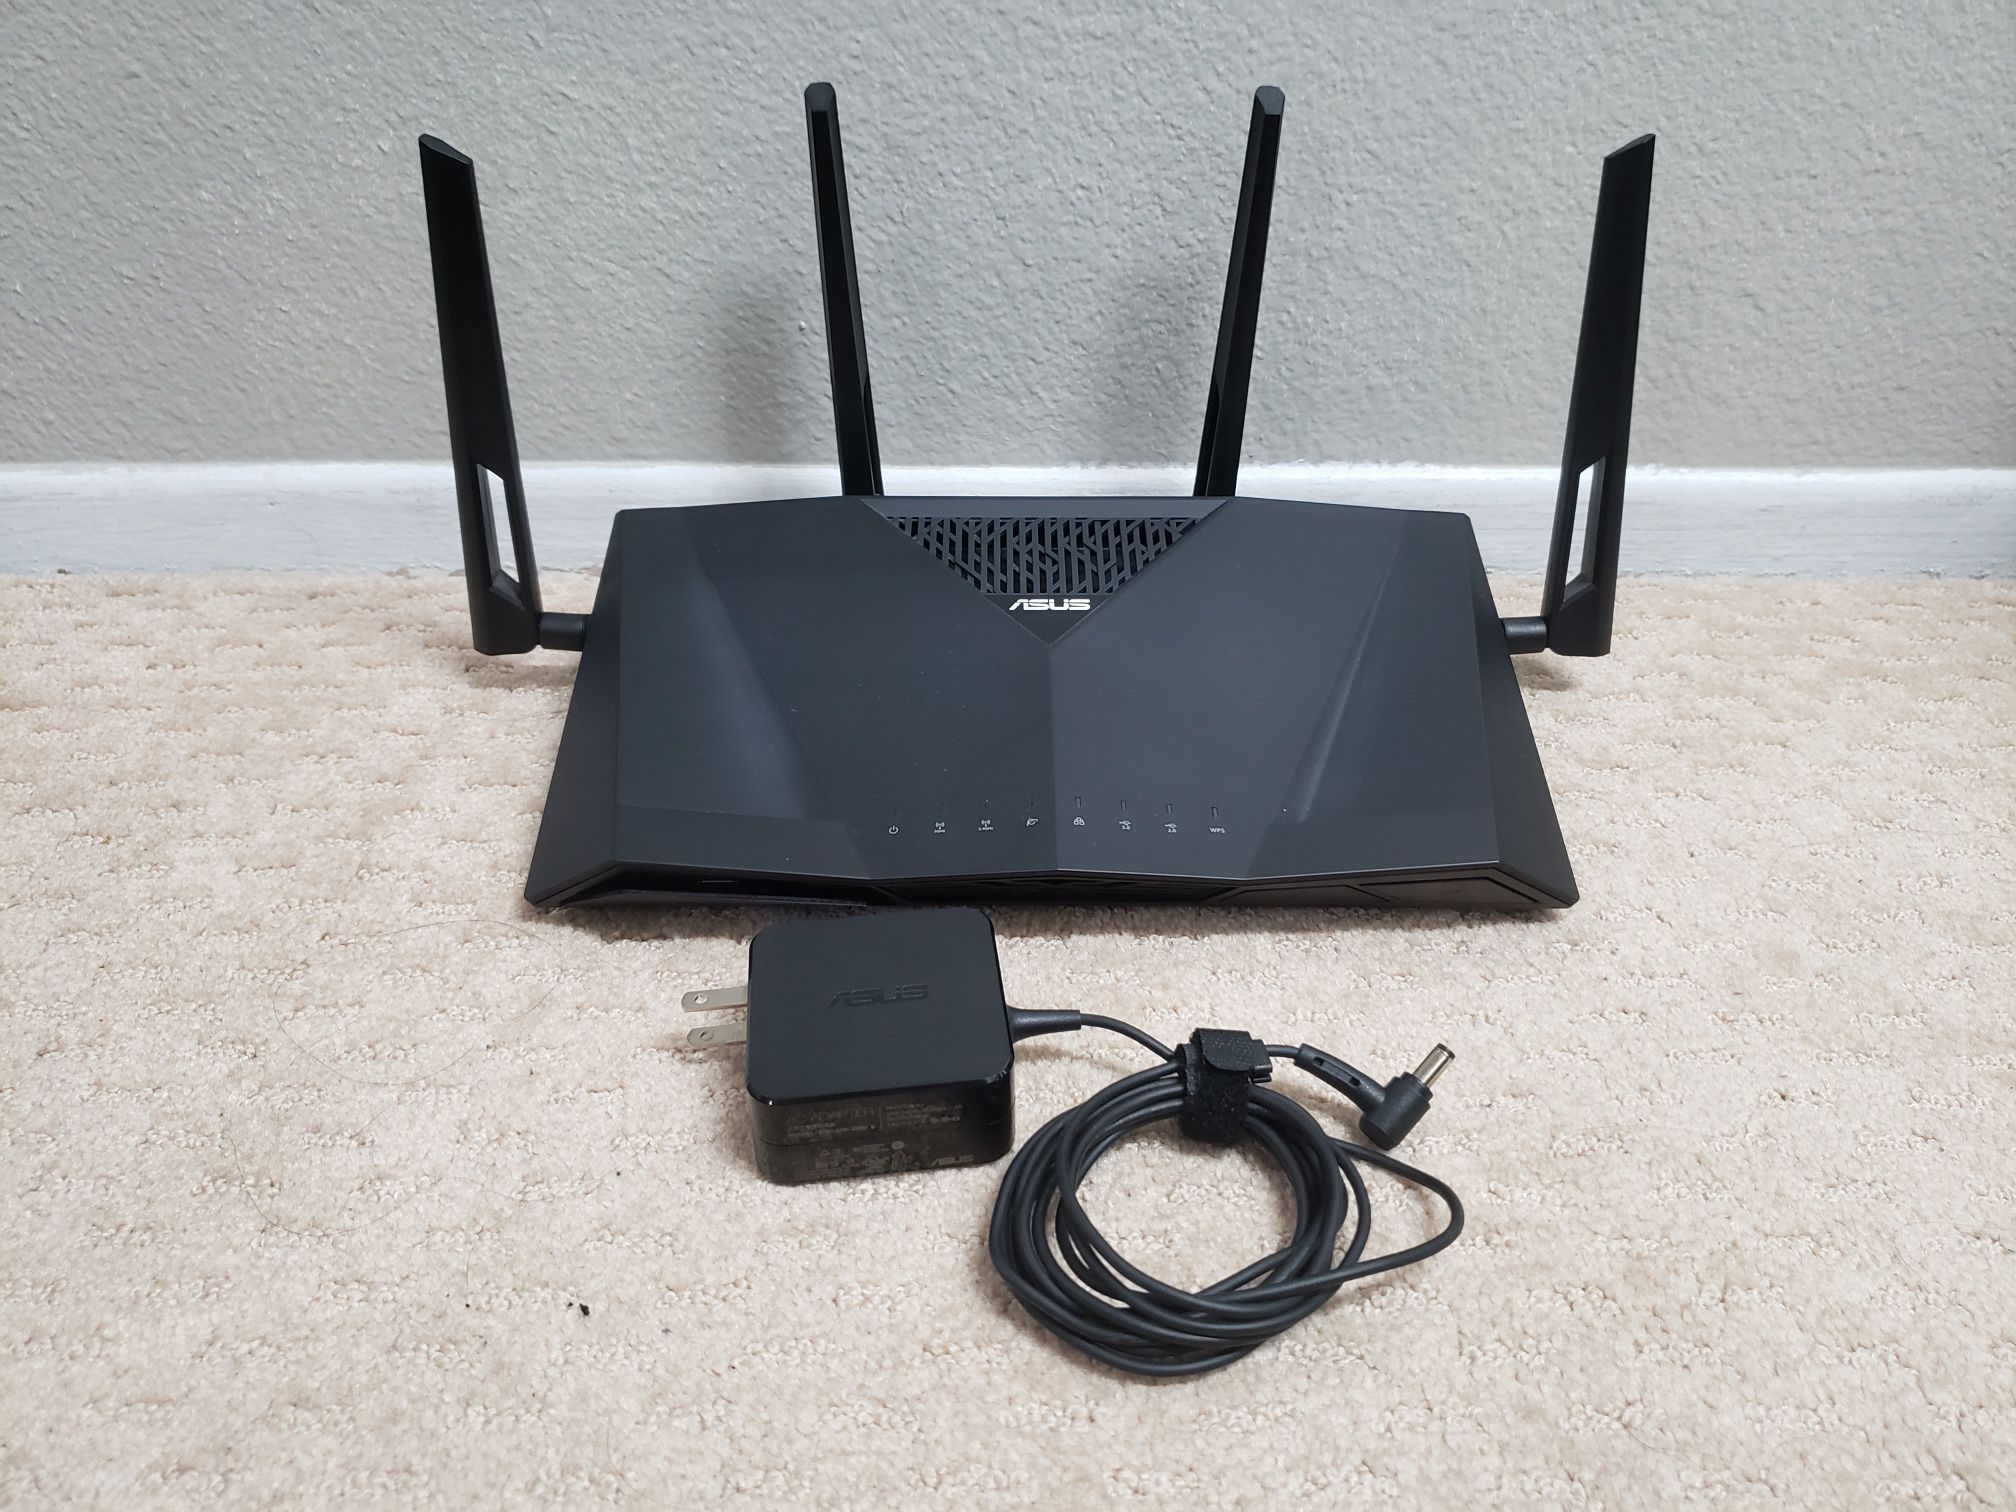 ASUS AC3100 RT-AC3100 4-Port Extreme Wi-Fi Router, Lightly Used Good Condition